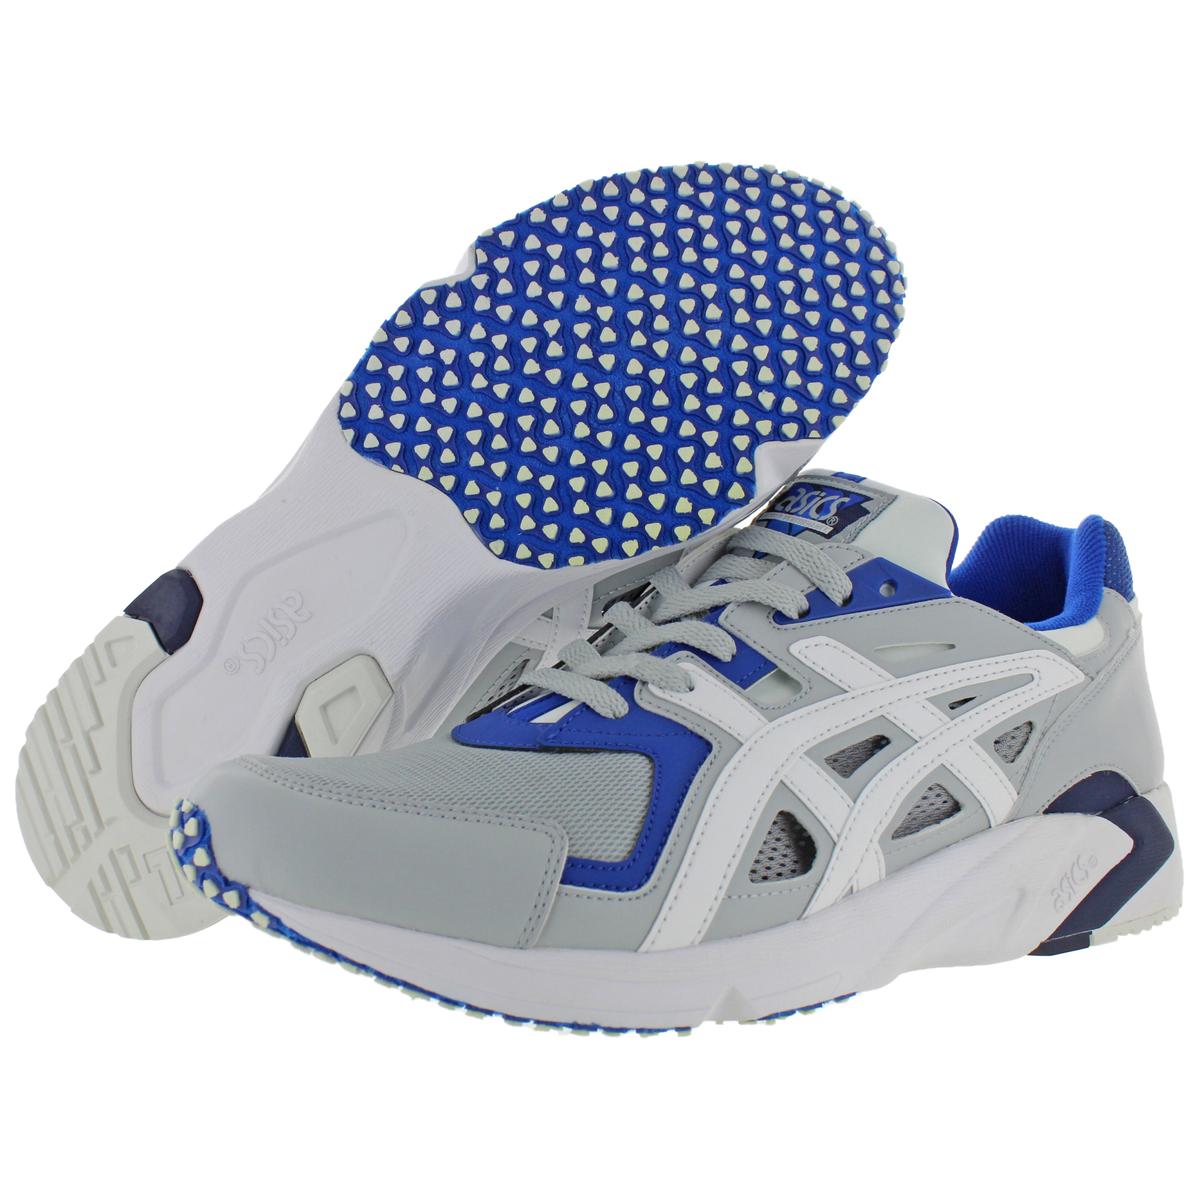 asics shoes for gym